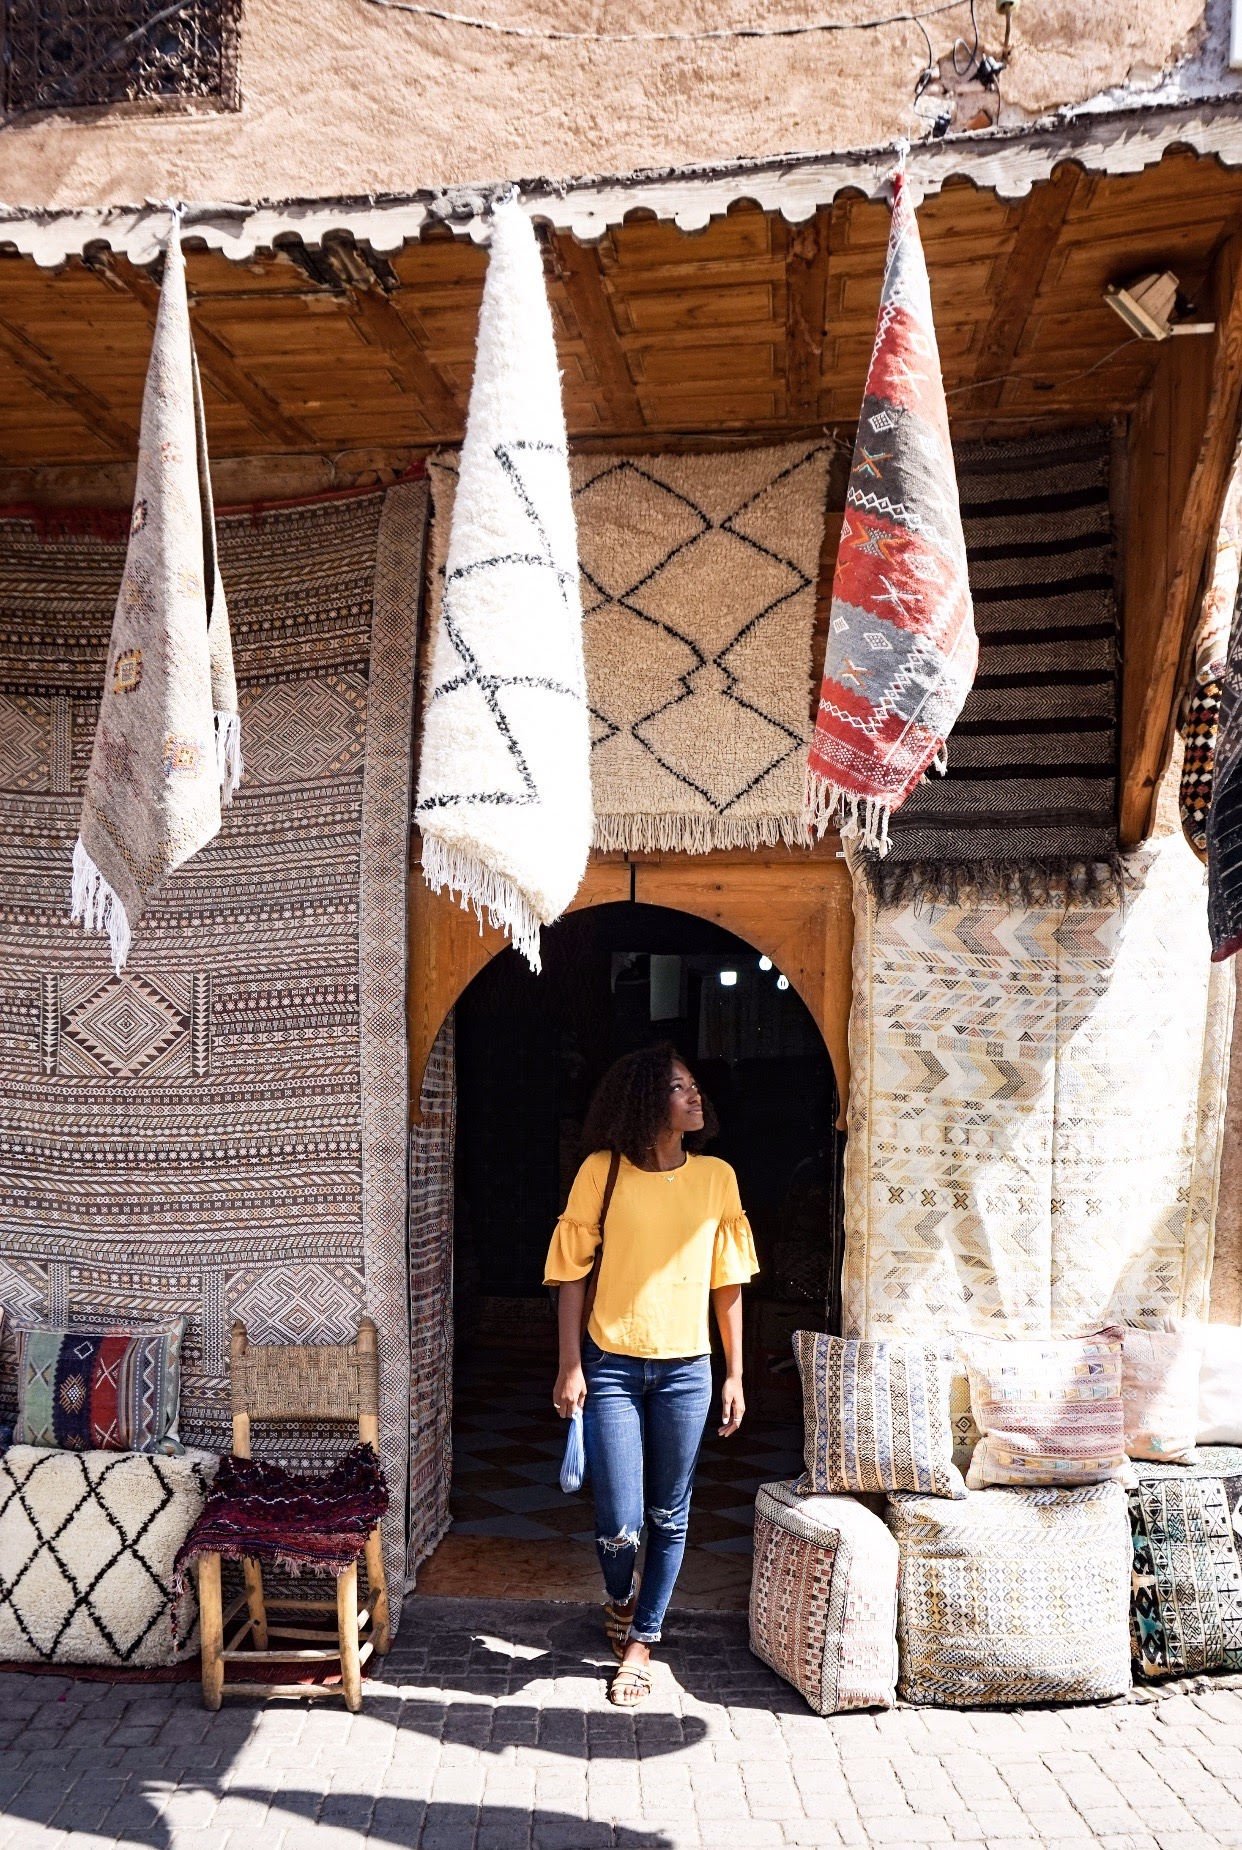 The owner of this rug store in Marrakesh, Morocco actually offered to take this photo of me. I was really grateful!